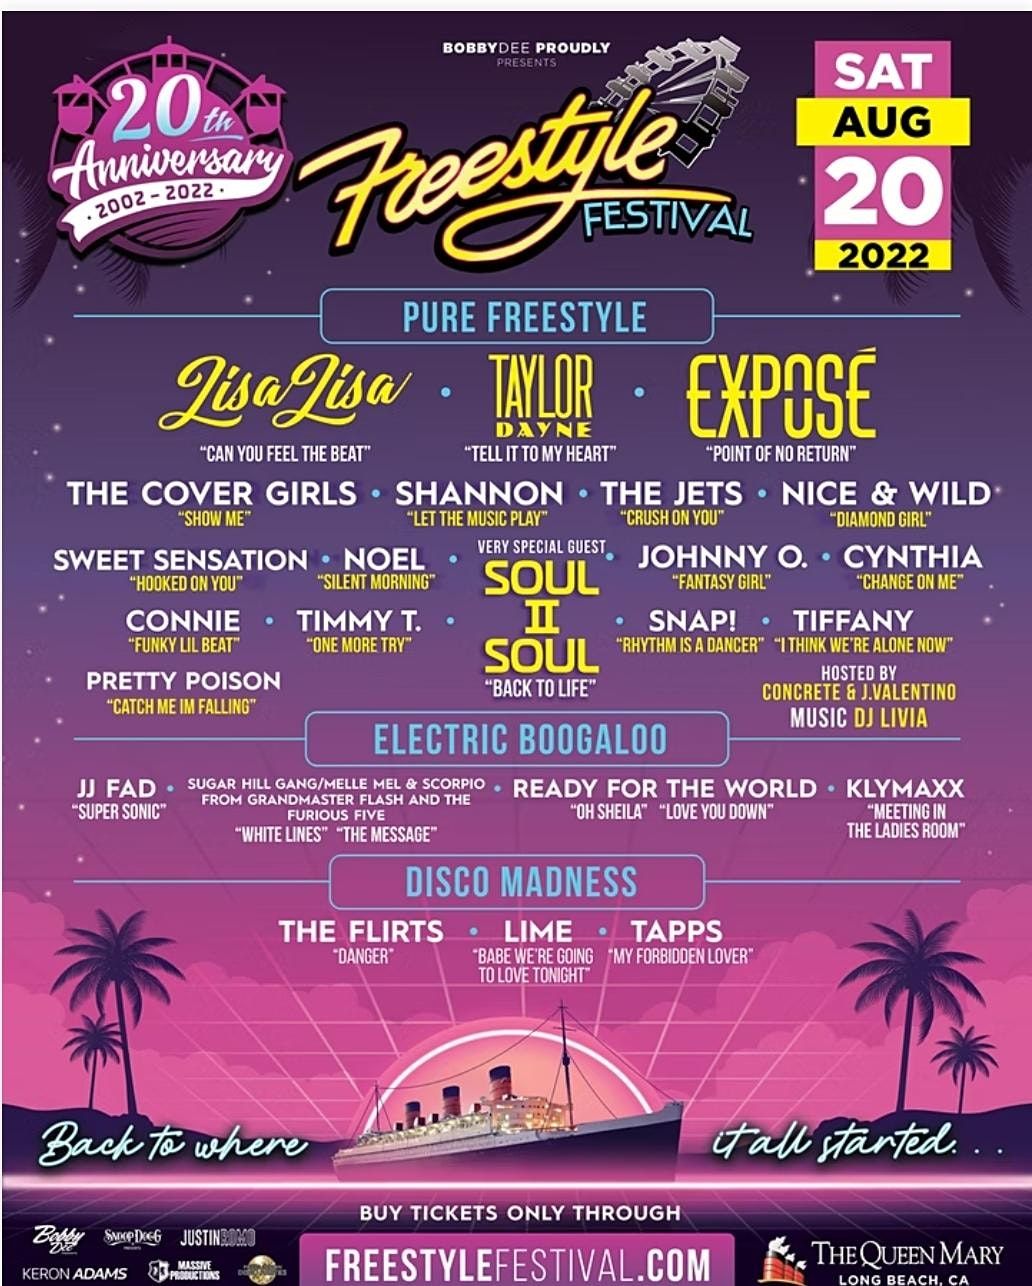 Freestyle Festival 2022 The Queen Mary, Long Beach, CA August 20, 2022